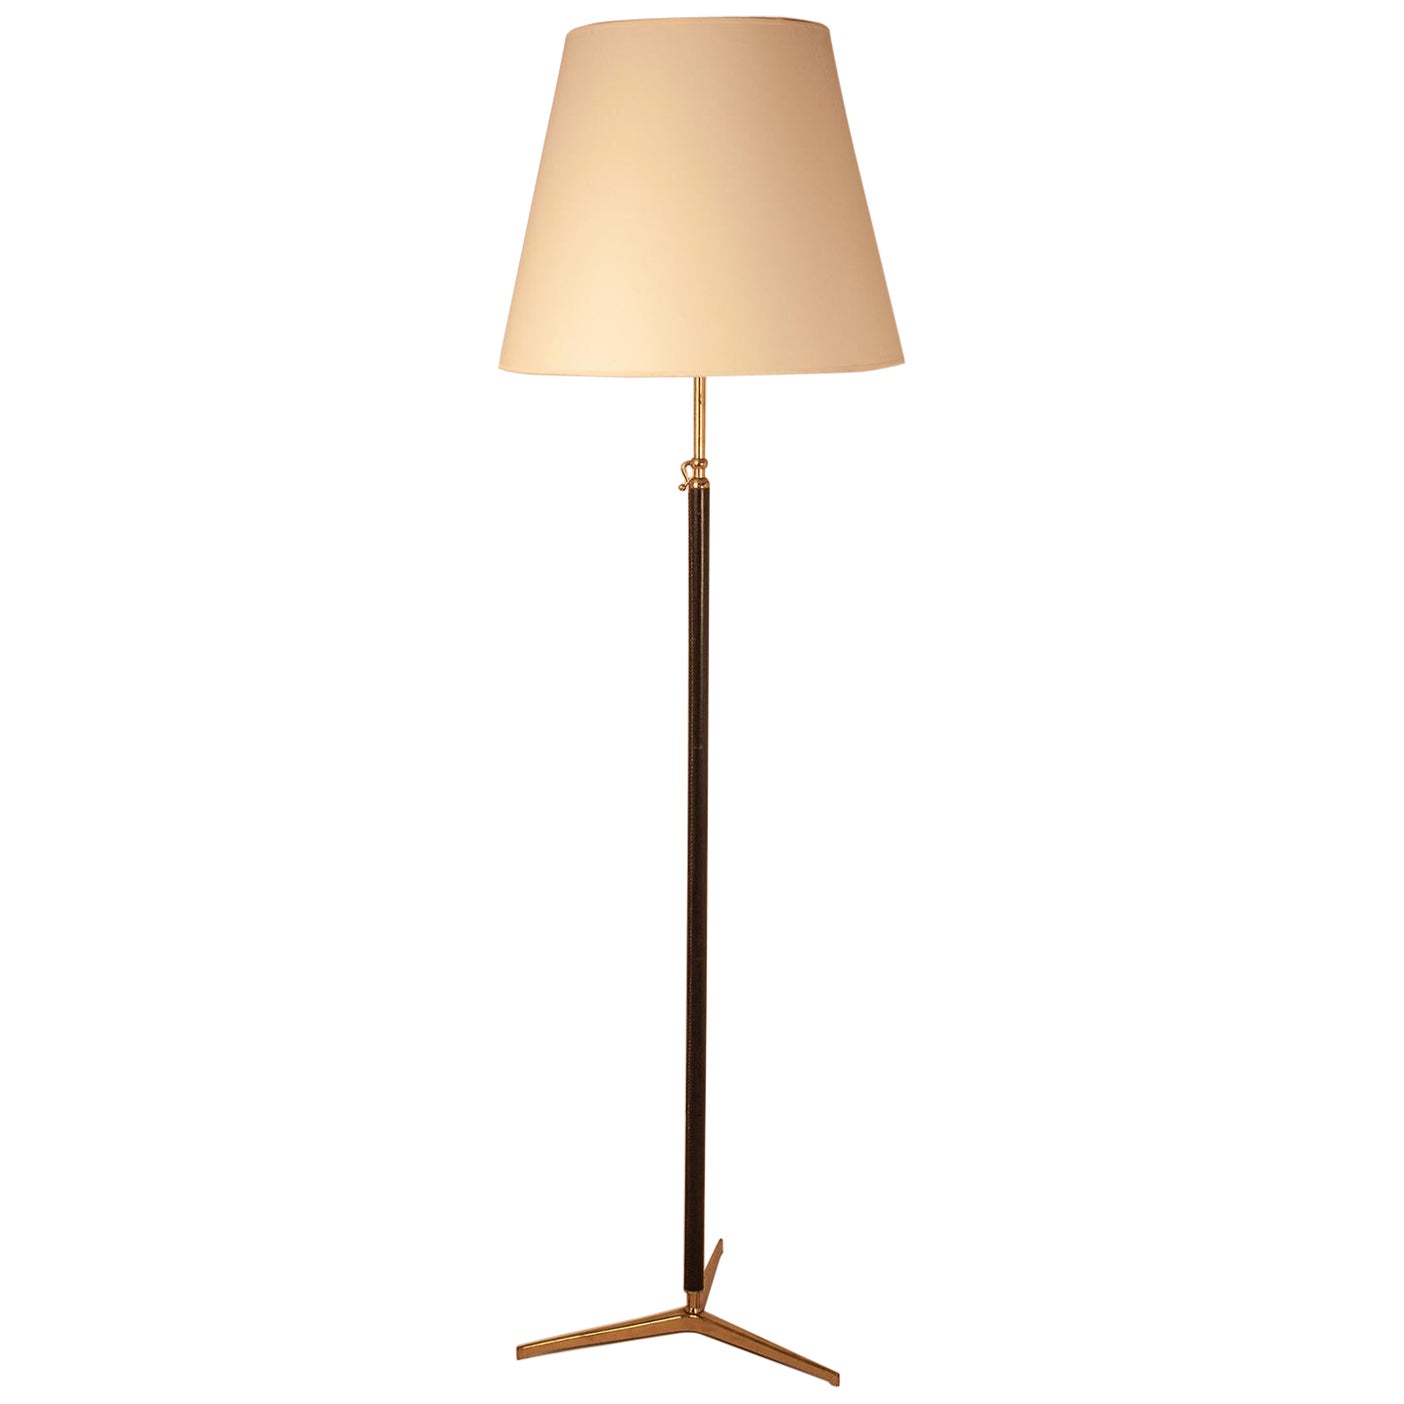 Floor Lamp Produced by Metalarte in the Style of Gino Sarfatti, Leather, Brass